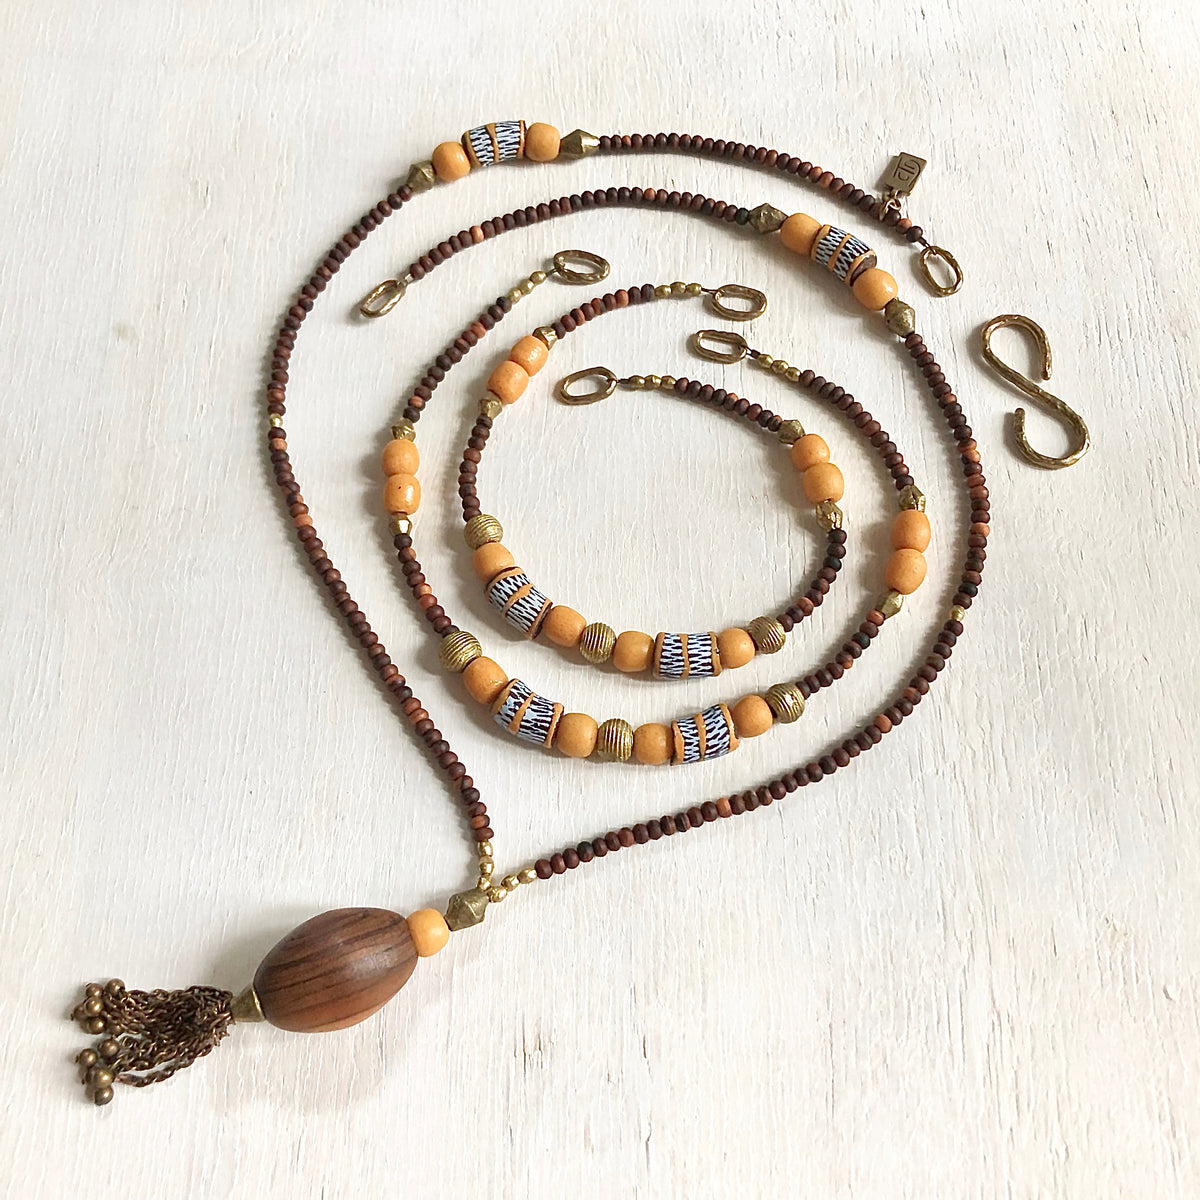 Hand painted brown yellow Adinkra African beads with vintage olive wood pendant long necklace. Cristina Tamames Jewelry Designer